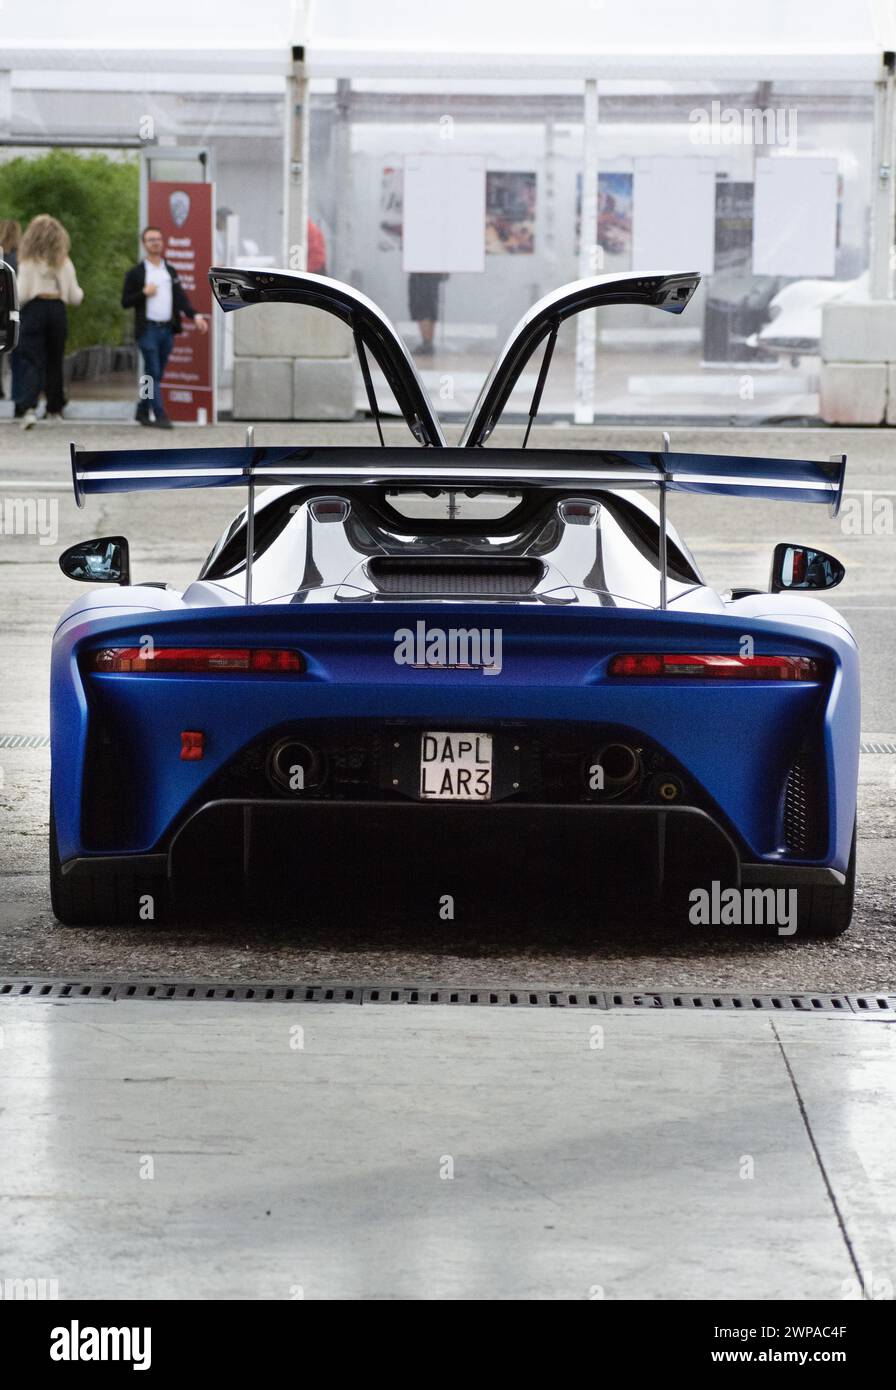 A Blue and black race car with open trunk viewed from the rear Stock Photo